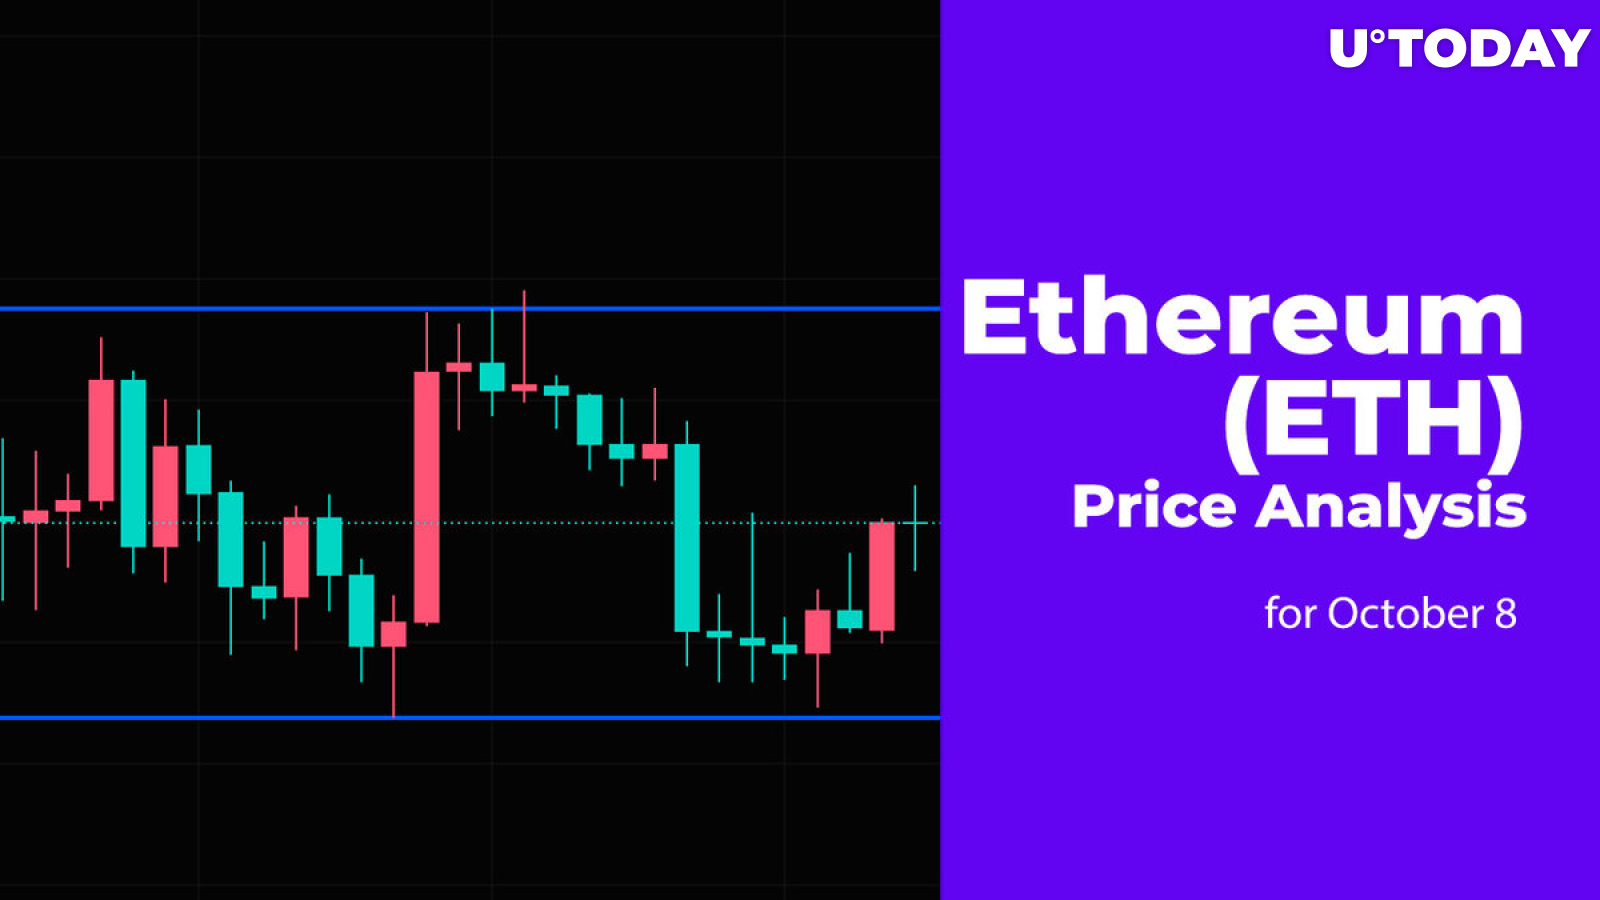 Ethereum (ETH) Price Analysis for October 8